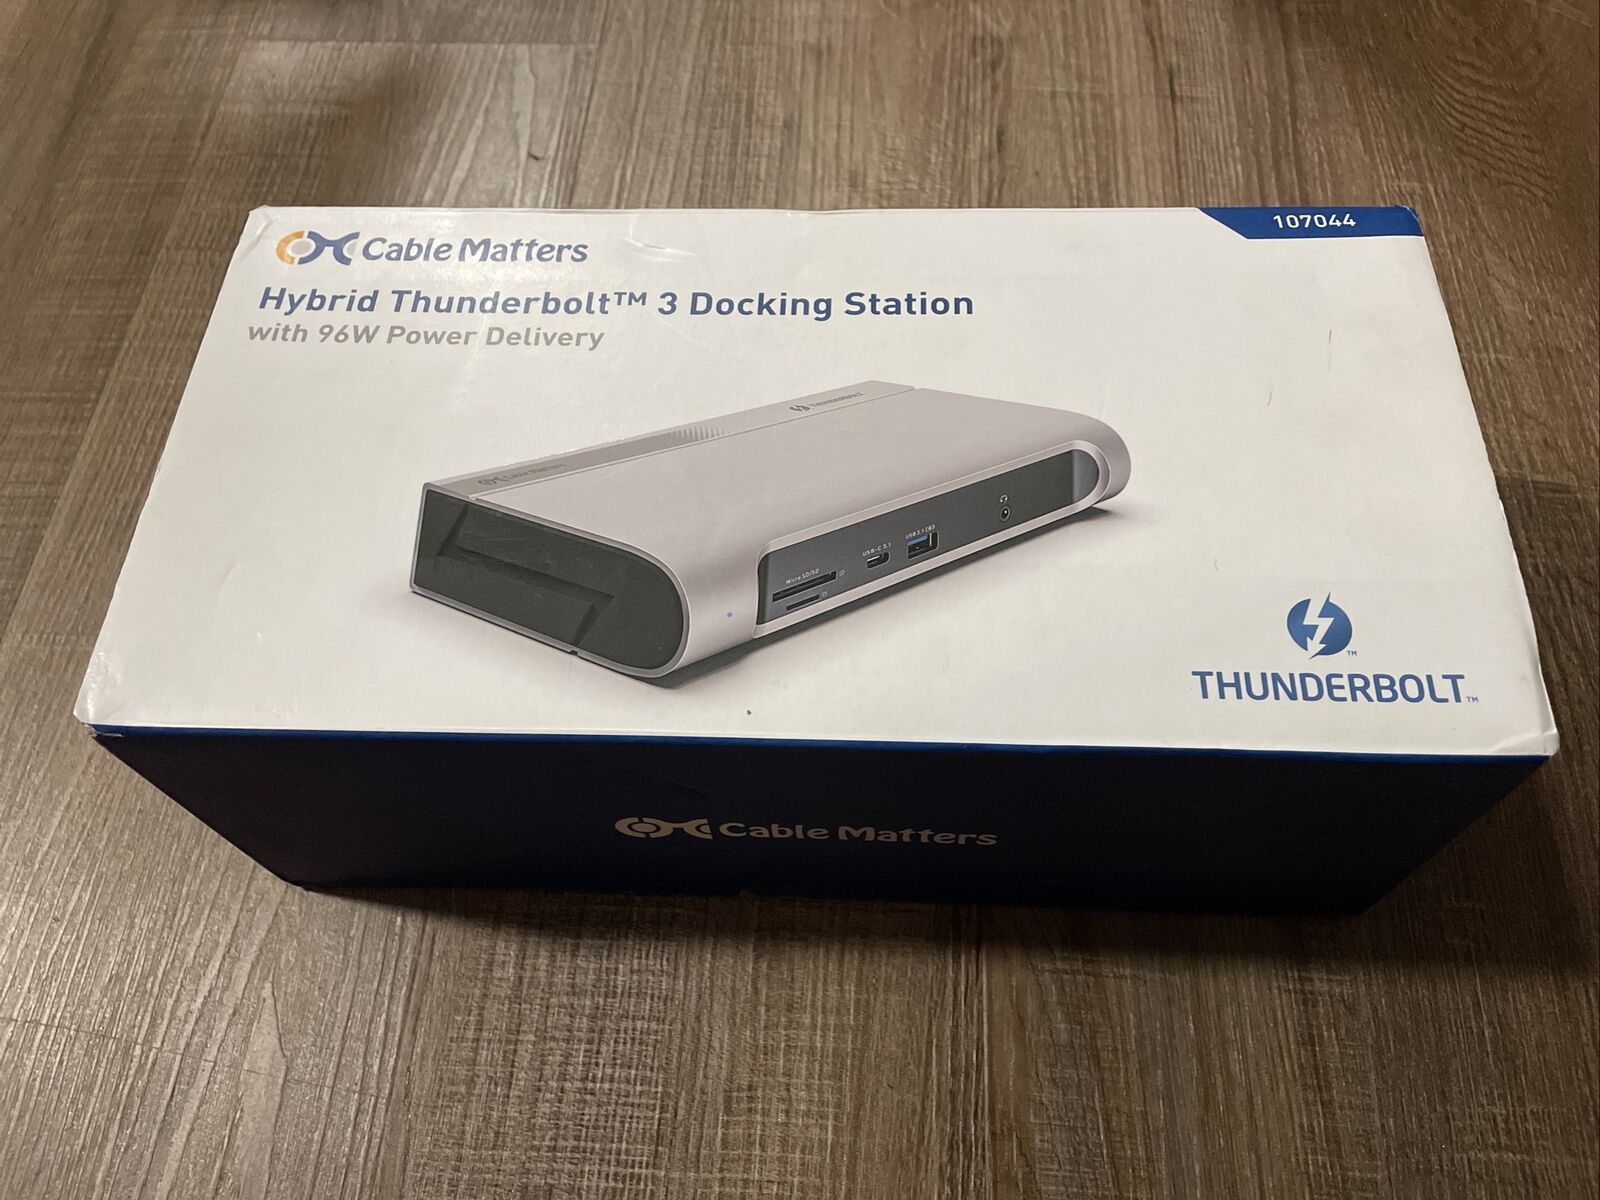 Cable Matters Hybrid Thunderbolt 3 Docking Station 96W Power Delivery 107044